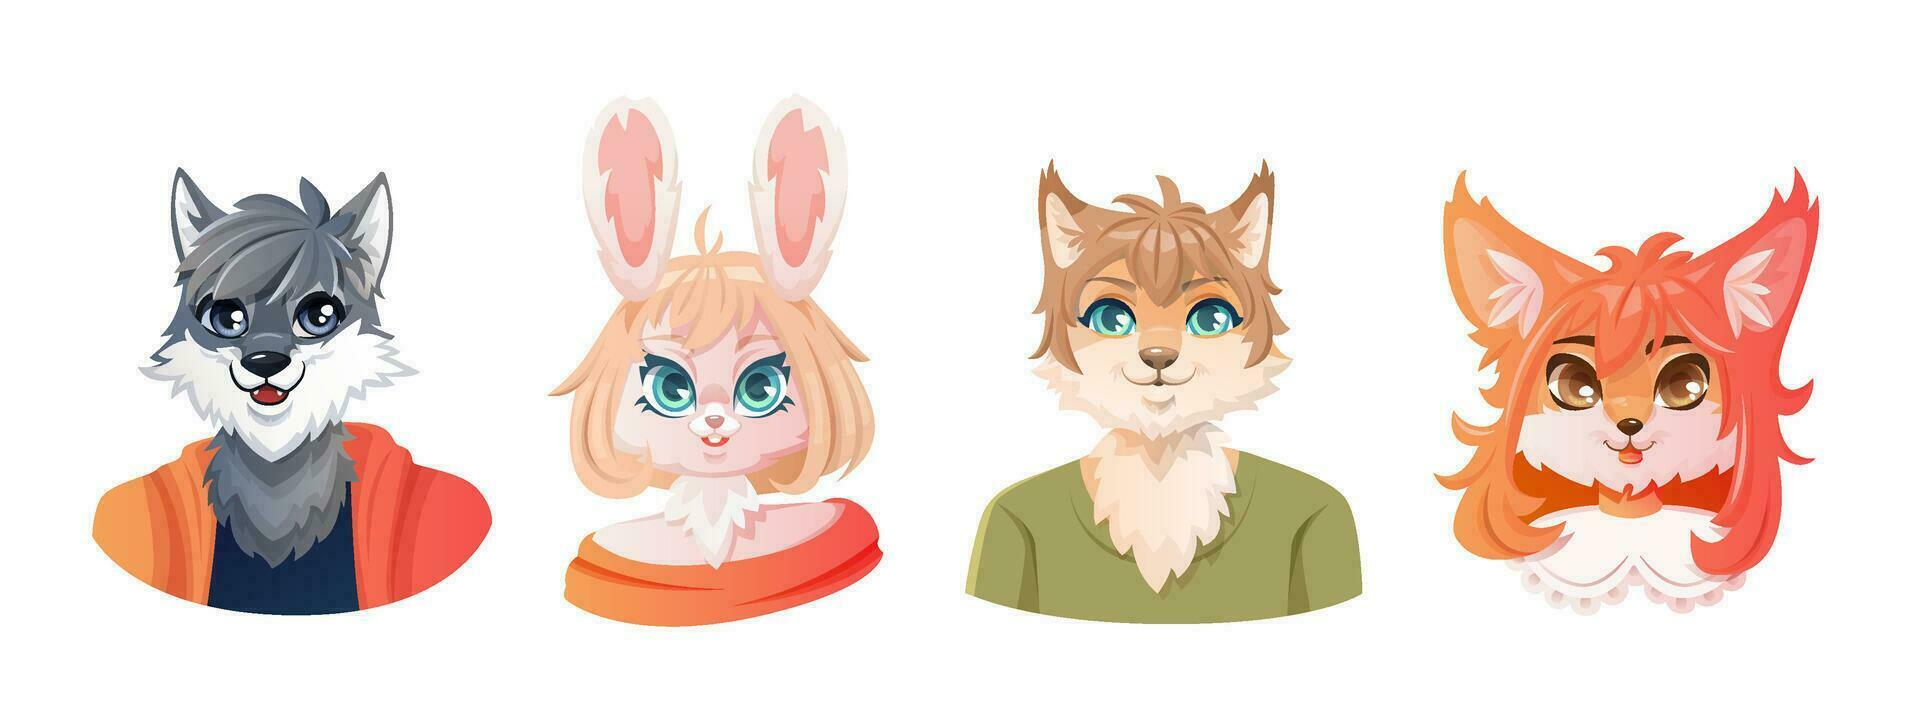 Set of portraits of a cute cartoon anthropomorphic furry characters. vector